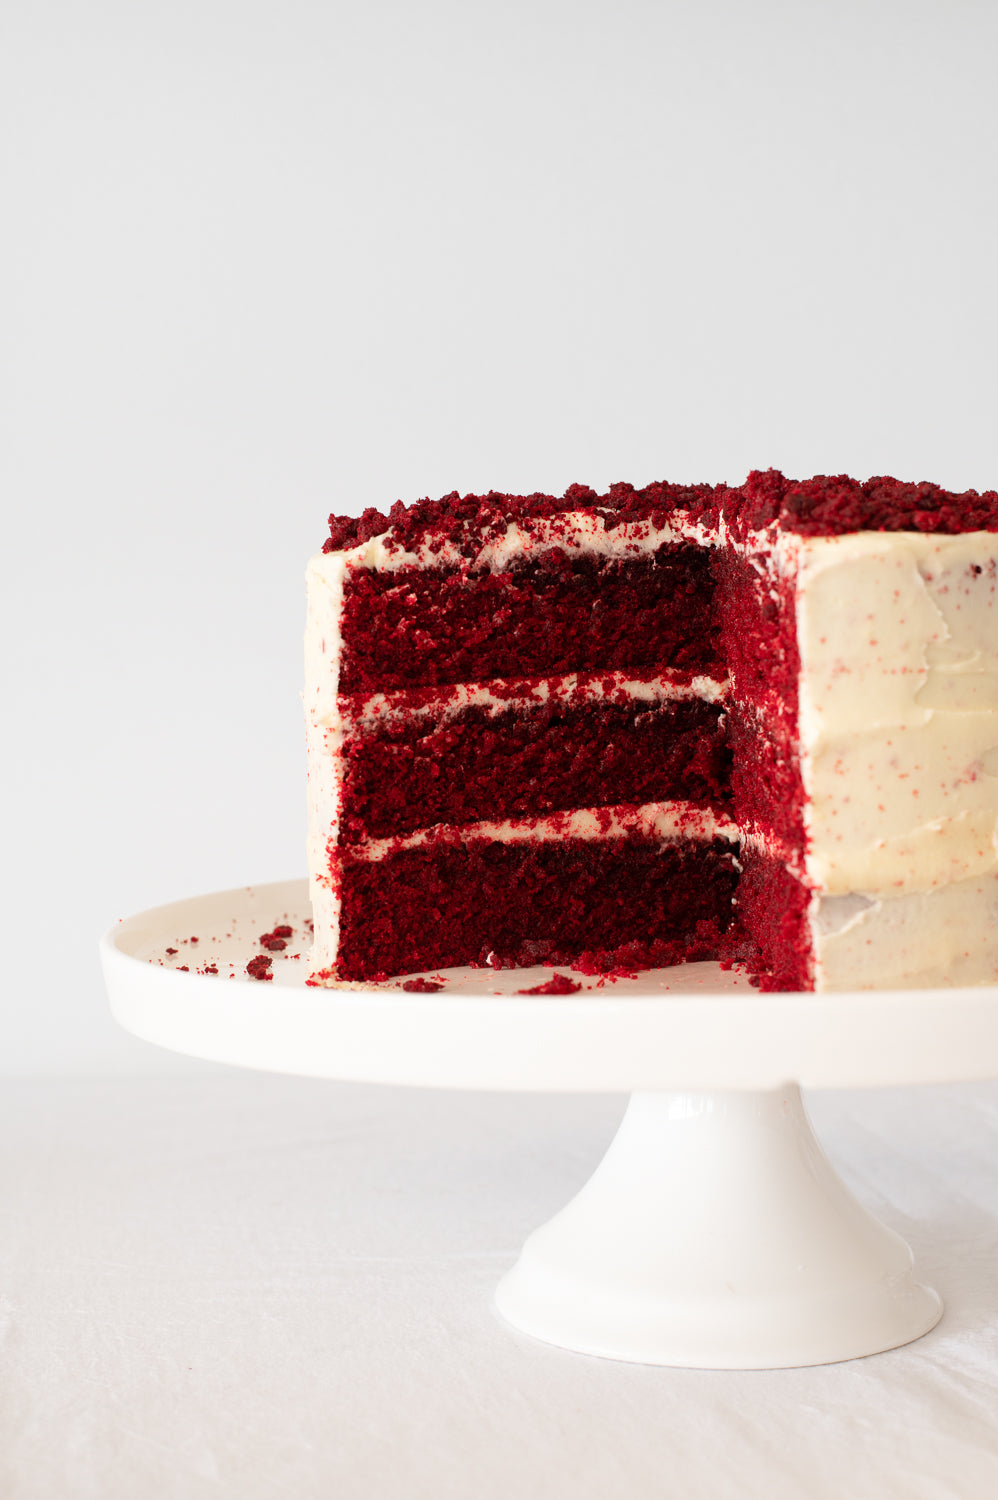 A close up of a Red Velvet Cake covered in cream cheese icing with red crumb garnish on top, showing three layers